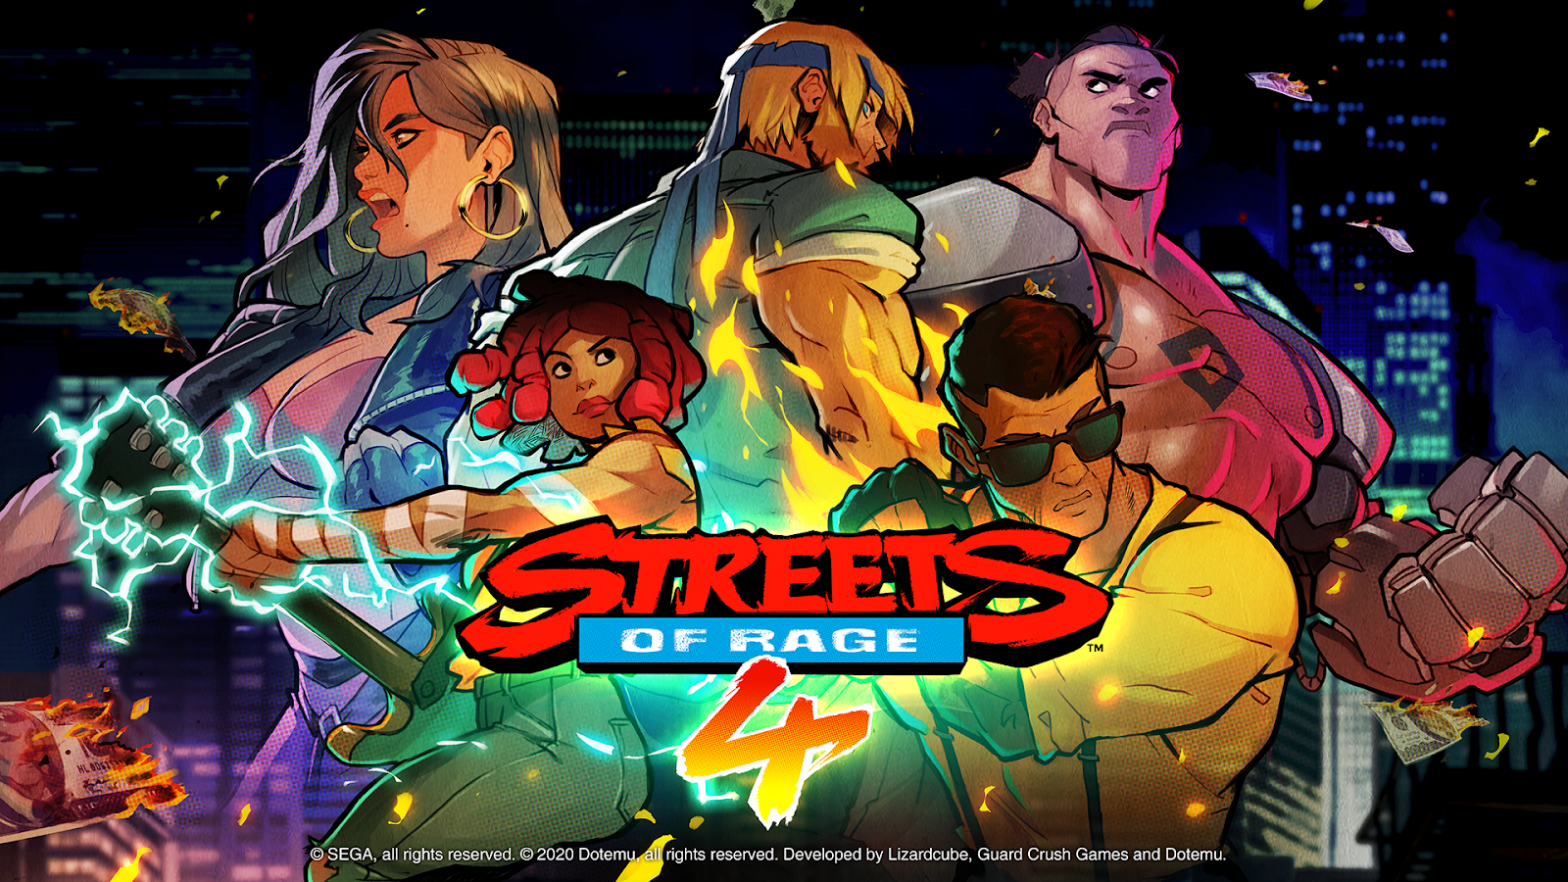 Need more of Streets of Rage 4? Check out our dev diaries!